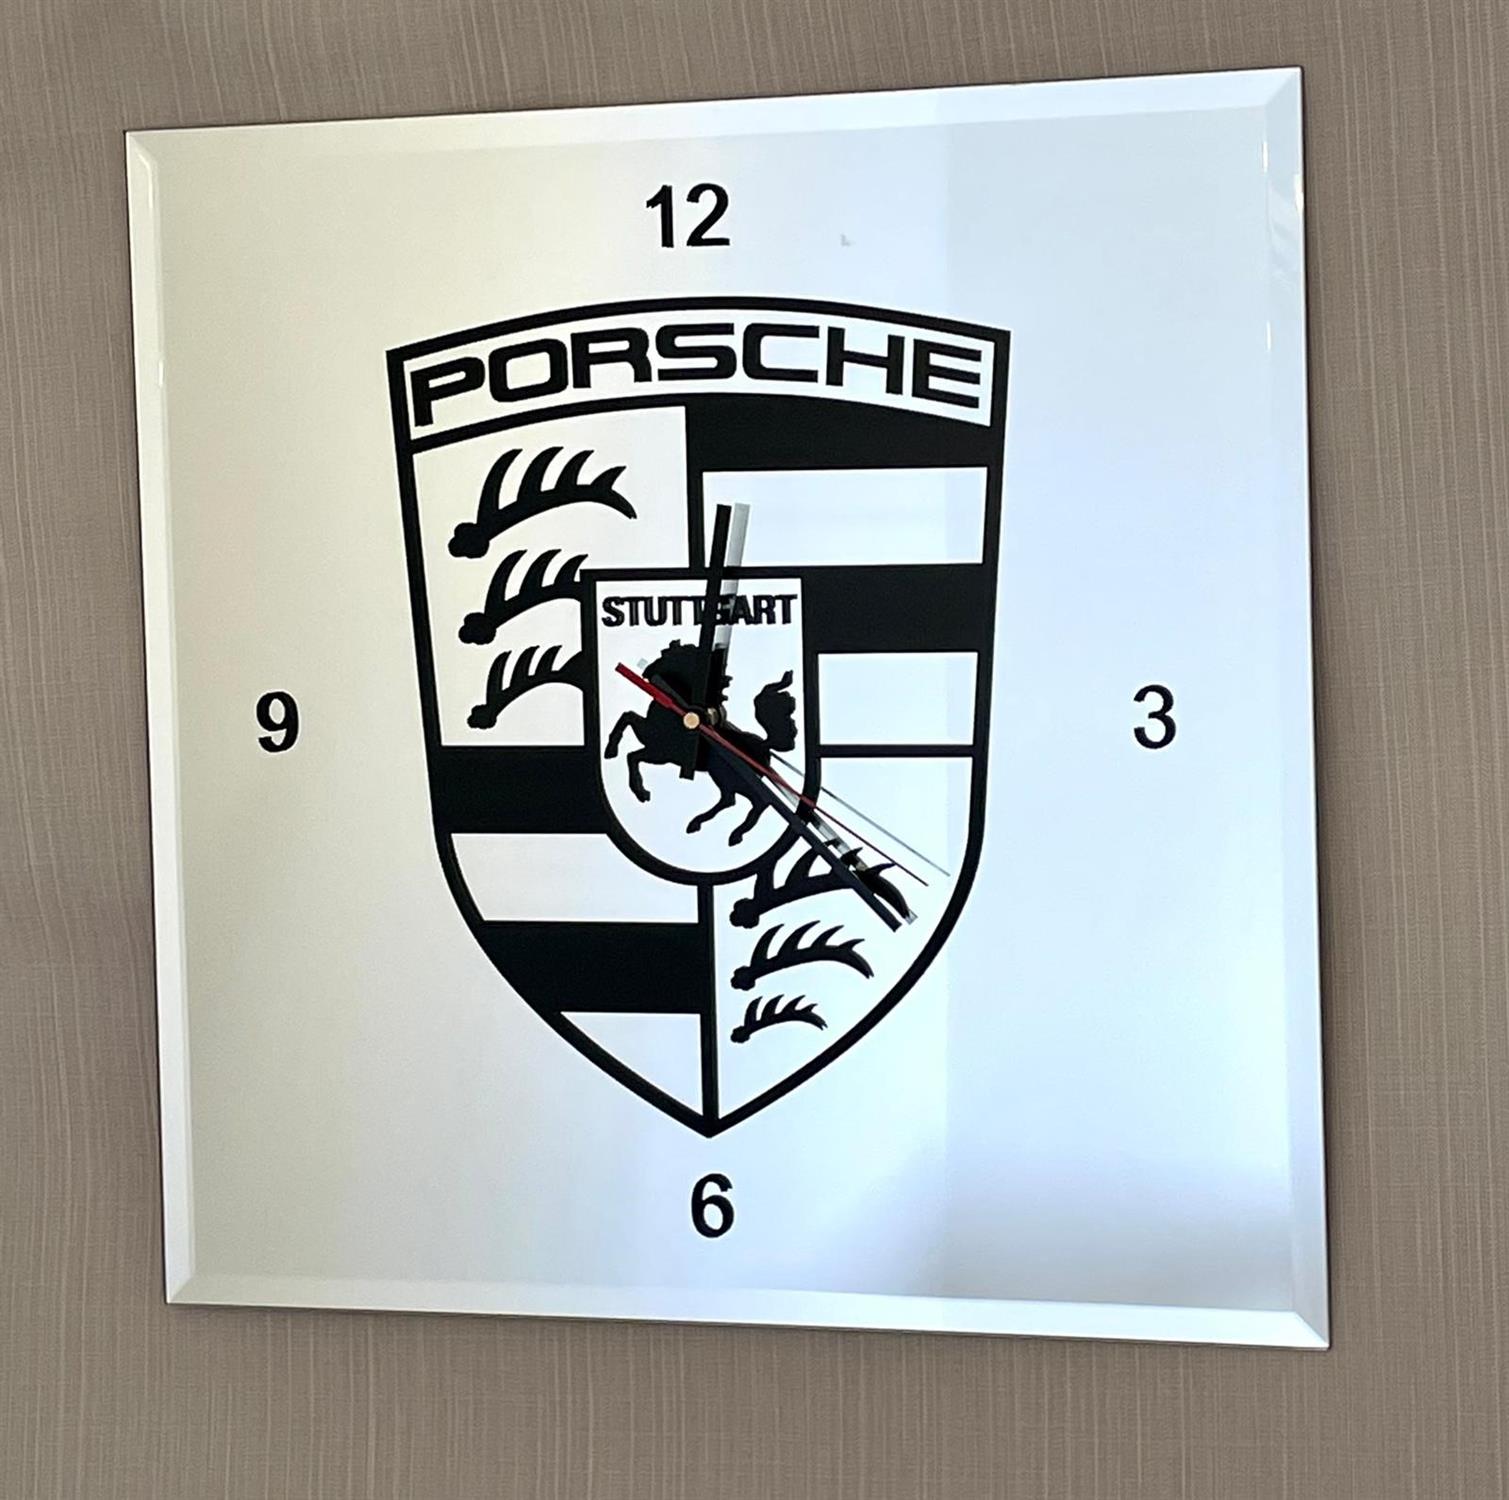 Large Porsche Shield Mirrored Wall Clock - Image 4 of 4